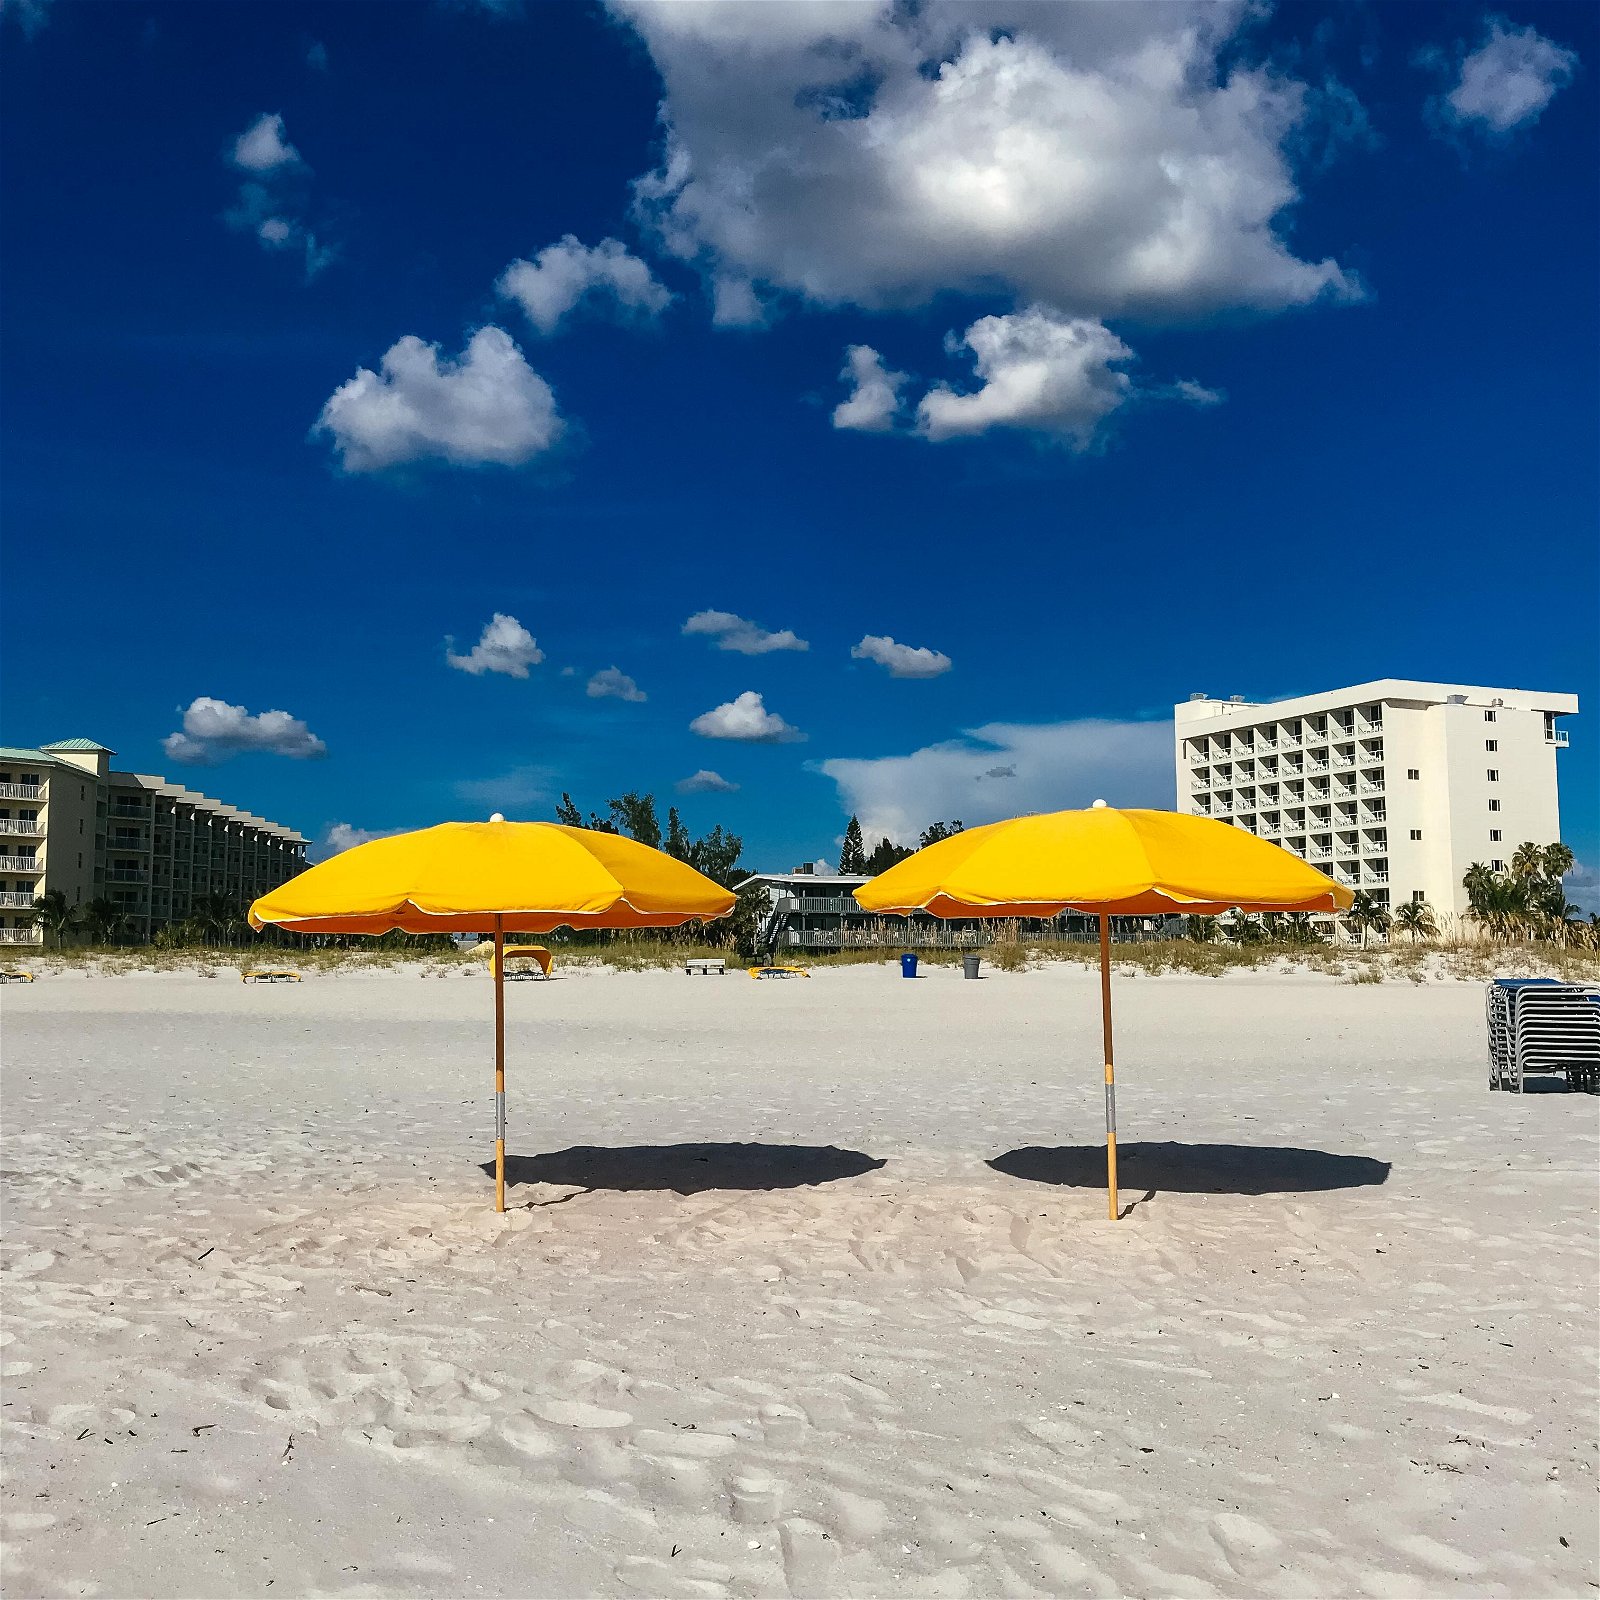 Two yellow umbrellas on a beach with white fluffy clouds in a blue sky